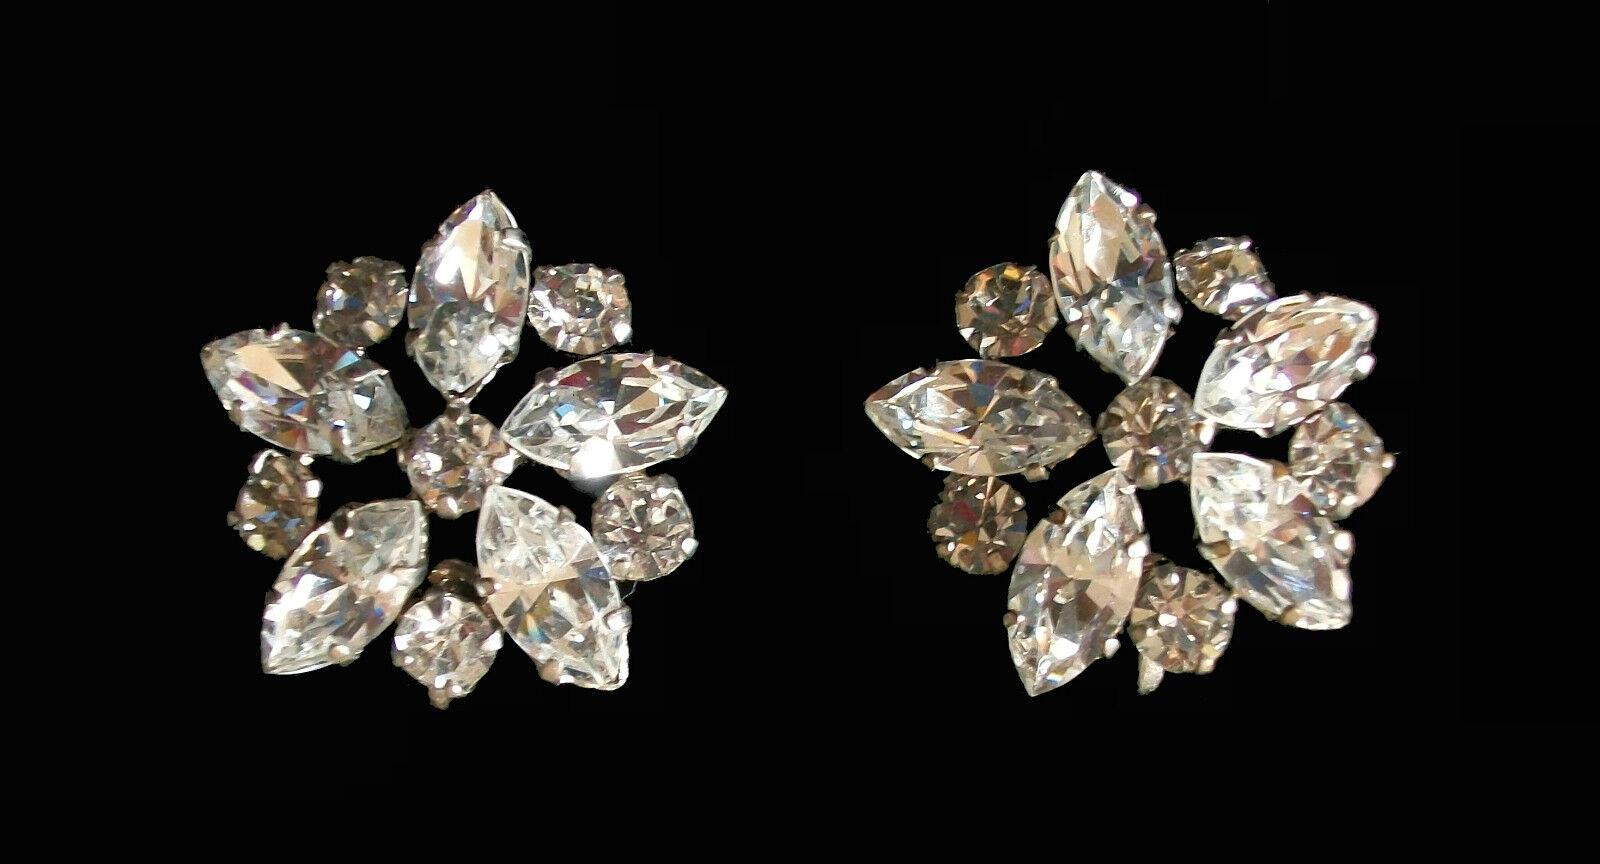 Vintage extraordinary quality Austrian crystal earrings - set with round and pear shaped rhinestones - each screw back marked 'AUSTRIA' - unsigned - Austria - mid 20th century.

Excellent vintage condition - no loss - no damage - no repairs - minor